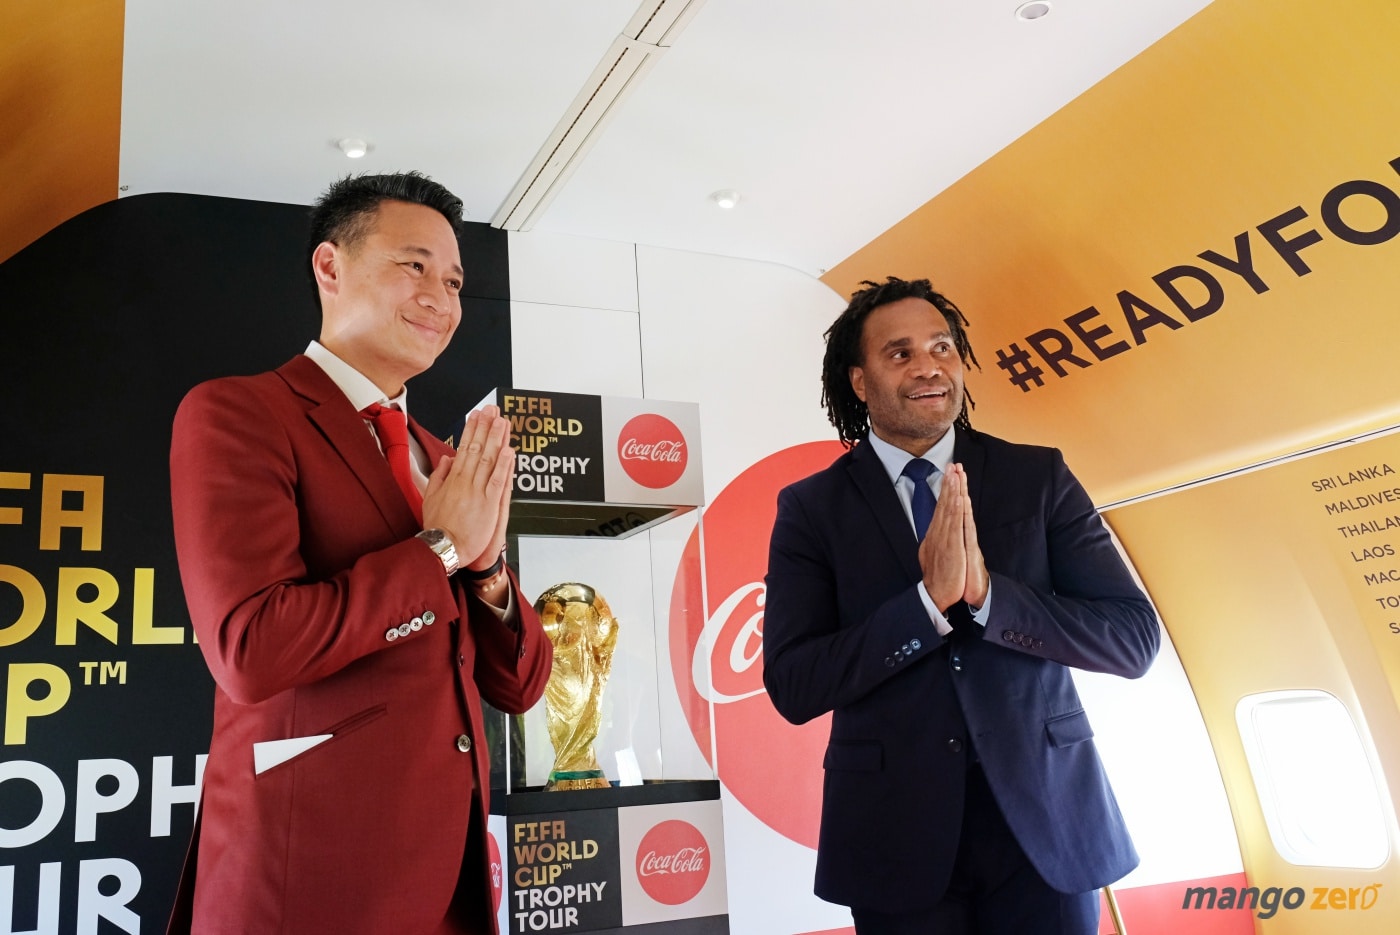 2018-fifa-world-cup-trophy-tour-by-coca-cola-at-phuket-8